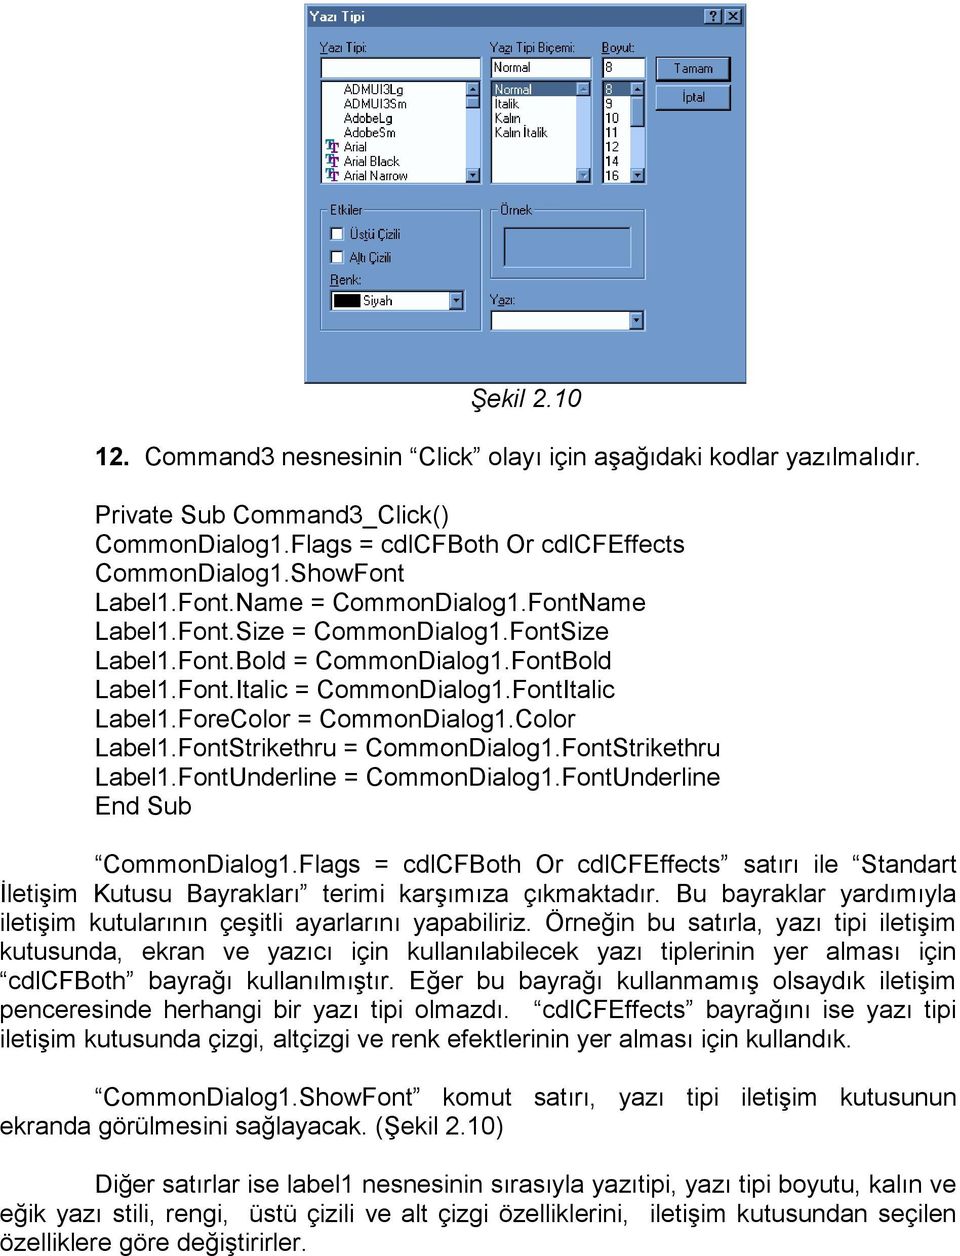 ForeColor = CommonDialog1.Color Label1.FontStrikethru = CommonDialog1.FontStrikethru Label1.FontUnderline = CommonDialog1.FontUnderline CommonDialog1.